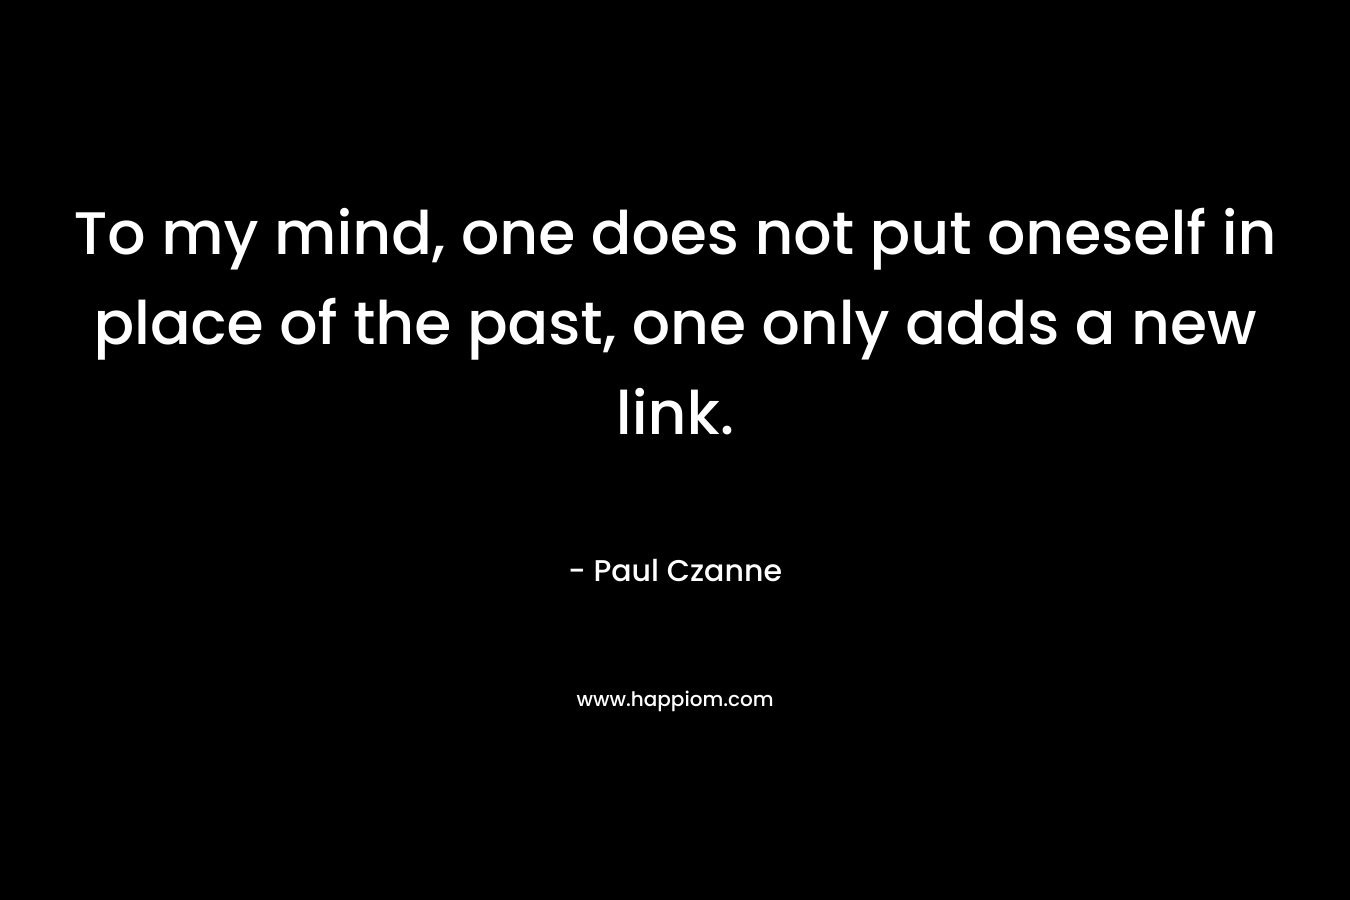 To my mind, one does not put oneself in place of the past, one only adds a new link. – Paul Czanne